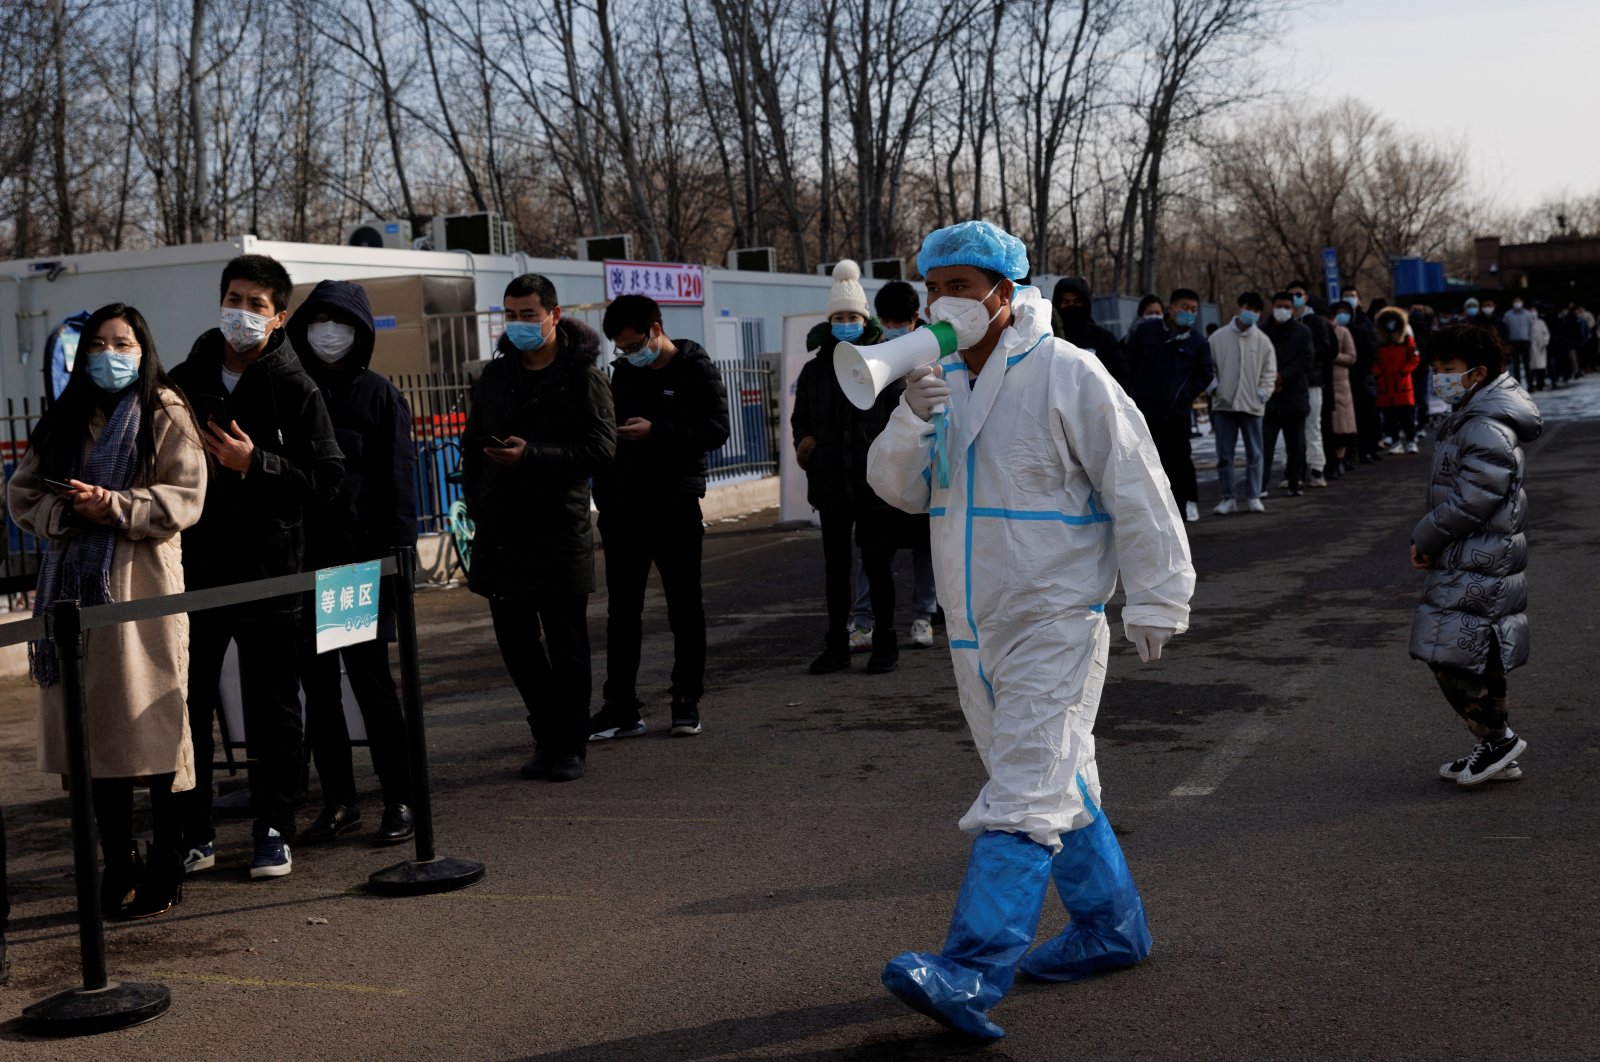 A staff member in a protective suit instructs people who are lining up for a throat swab test at a temporary COVID-19 testing center, Beijing, China, Jan. 26, 2022. (Reuters Photo)